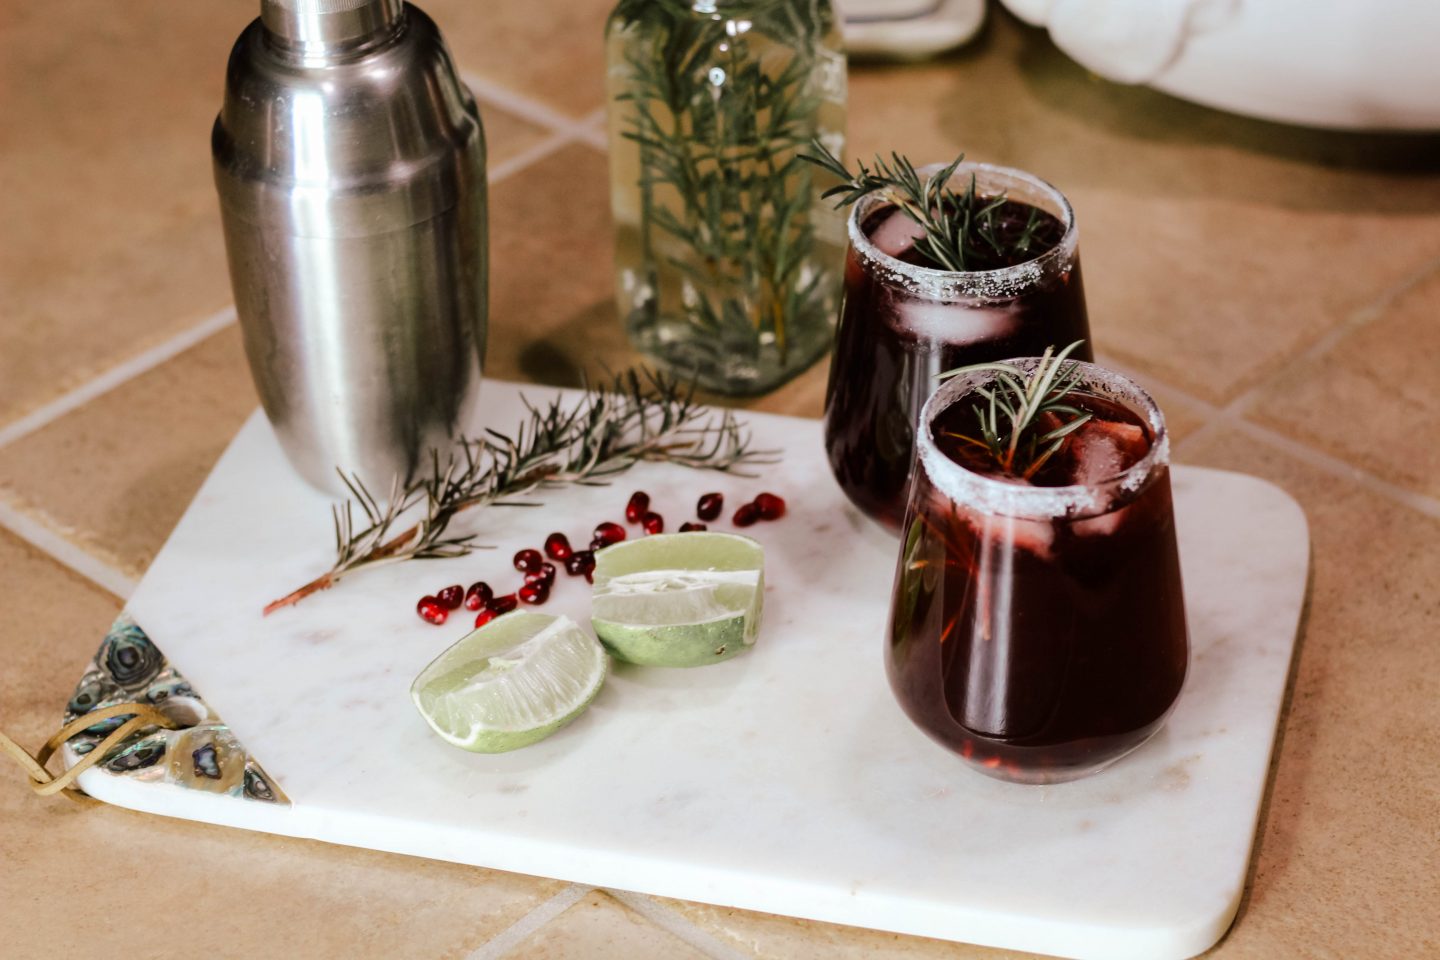 My Favorite At-Home Winter Cocktail – Pomegranate Rosemary Spritz